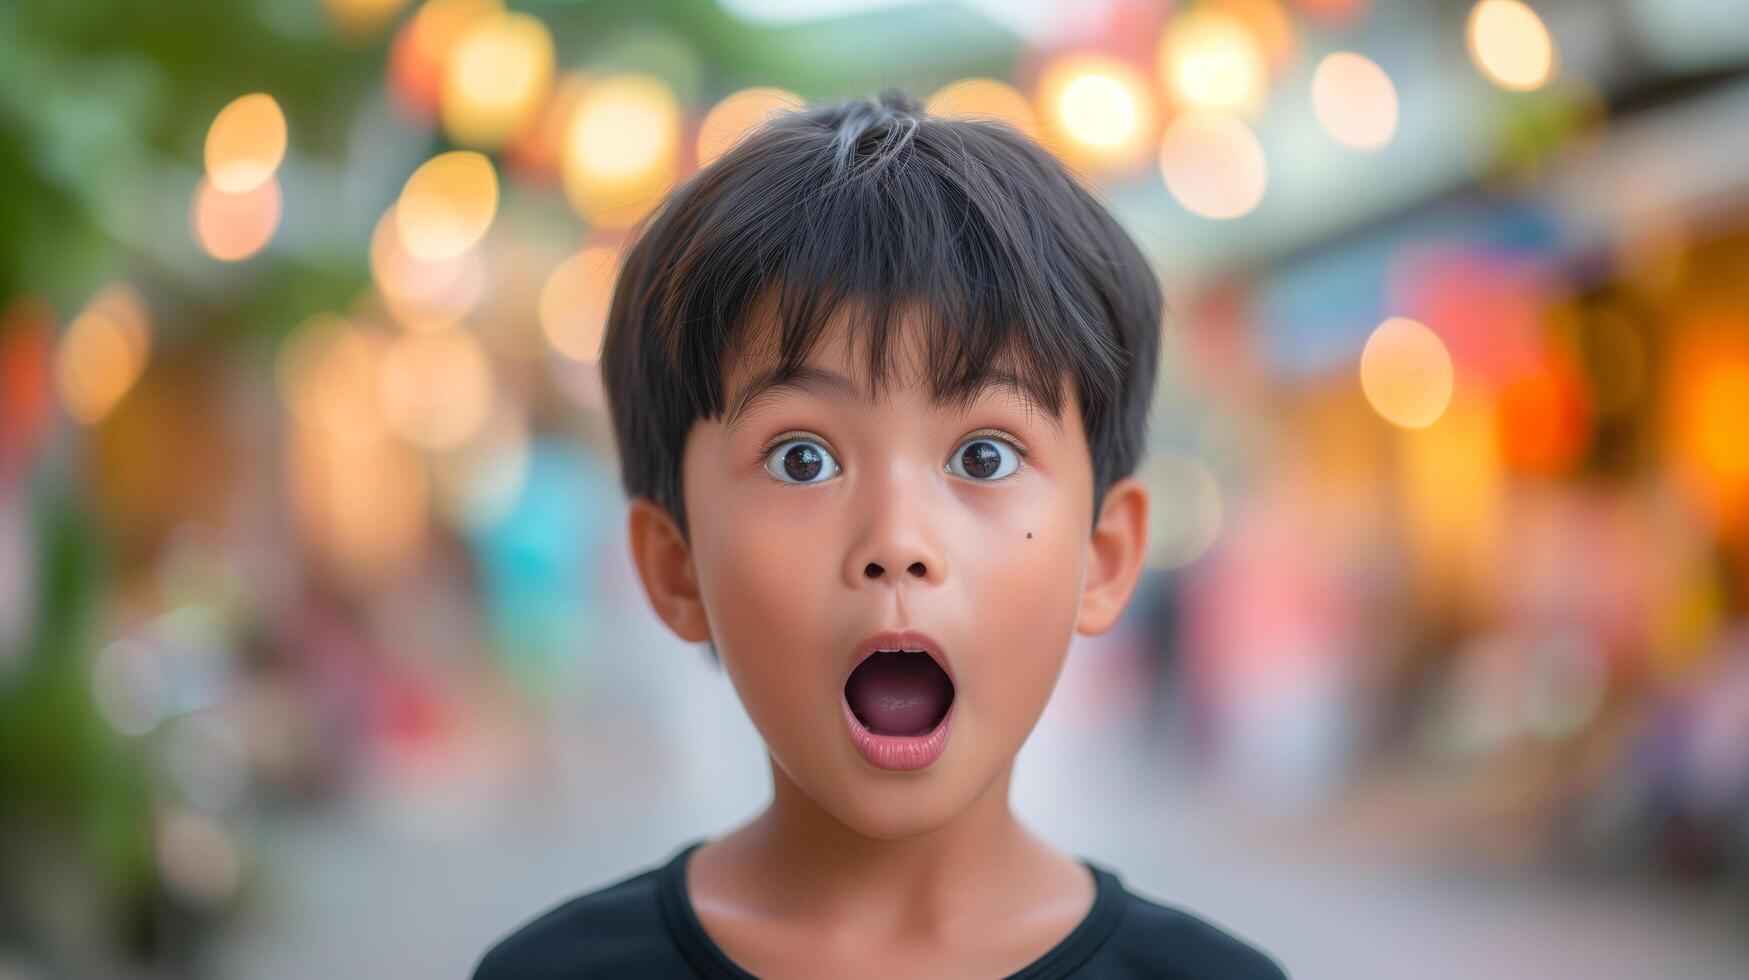 AI generated Portrait surprise face, Portrait of an amazed boy with an open mouth and round big eyes, astonished expression,  Looking camera. blur bokeh background. photo